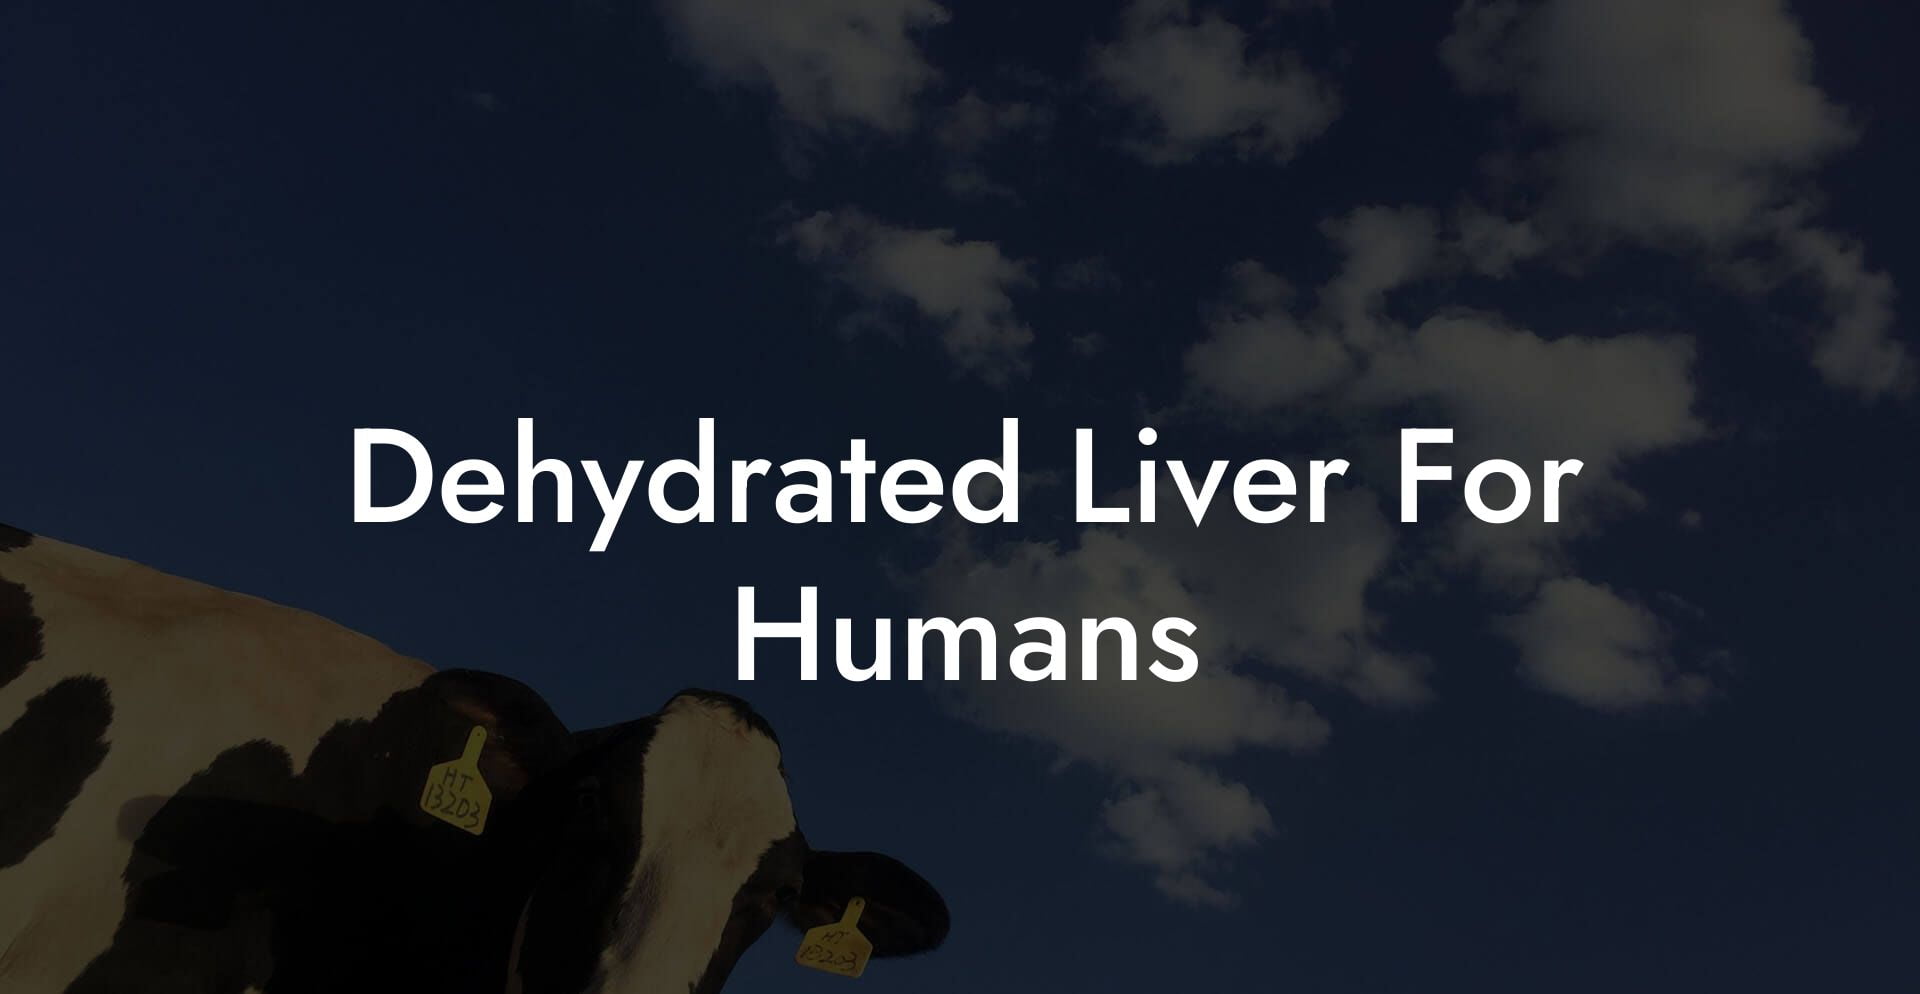 Dehydrated Liver For Humans